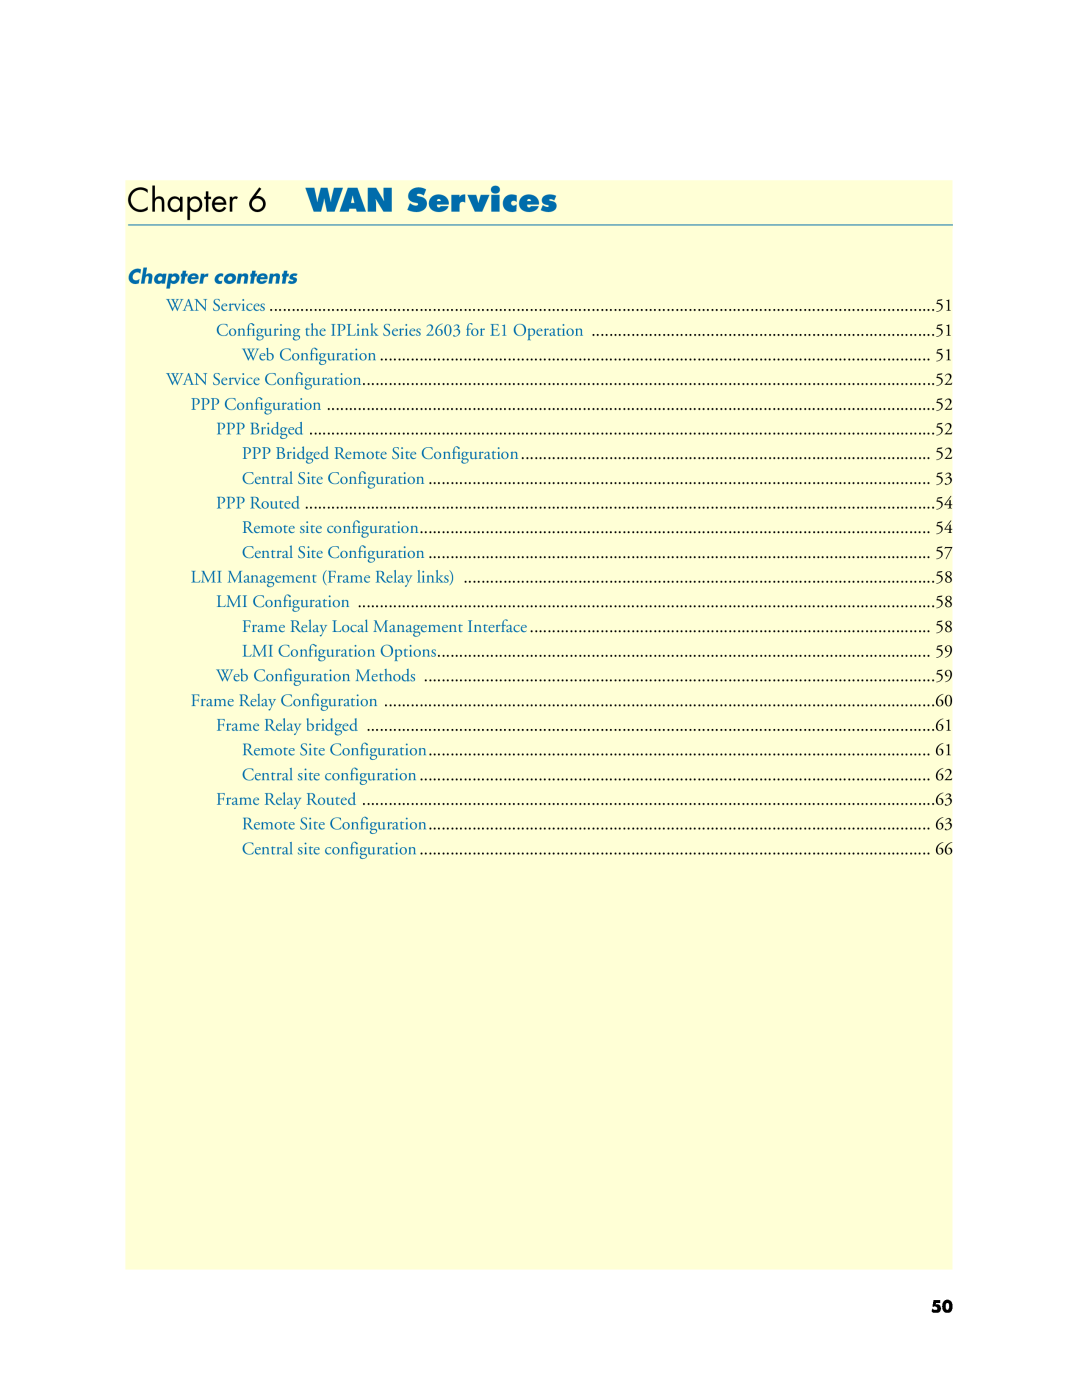 Patton electronic 2621, 2635 manual WAN Services, Chapter contents, PPP Configuration, LMI Management Frame Relay links 